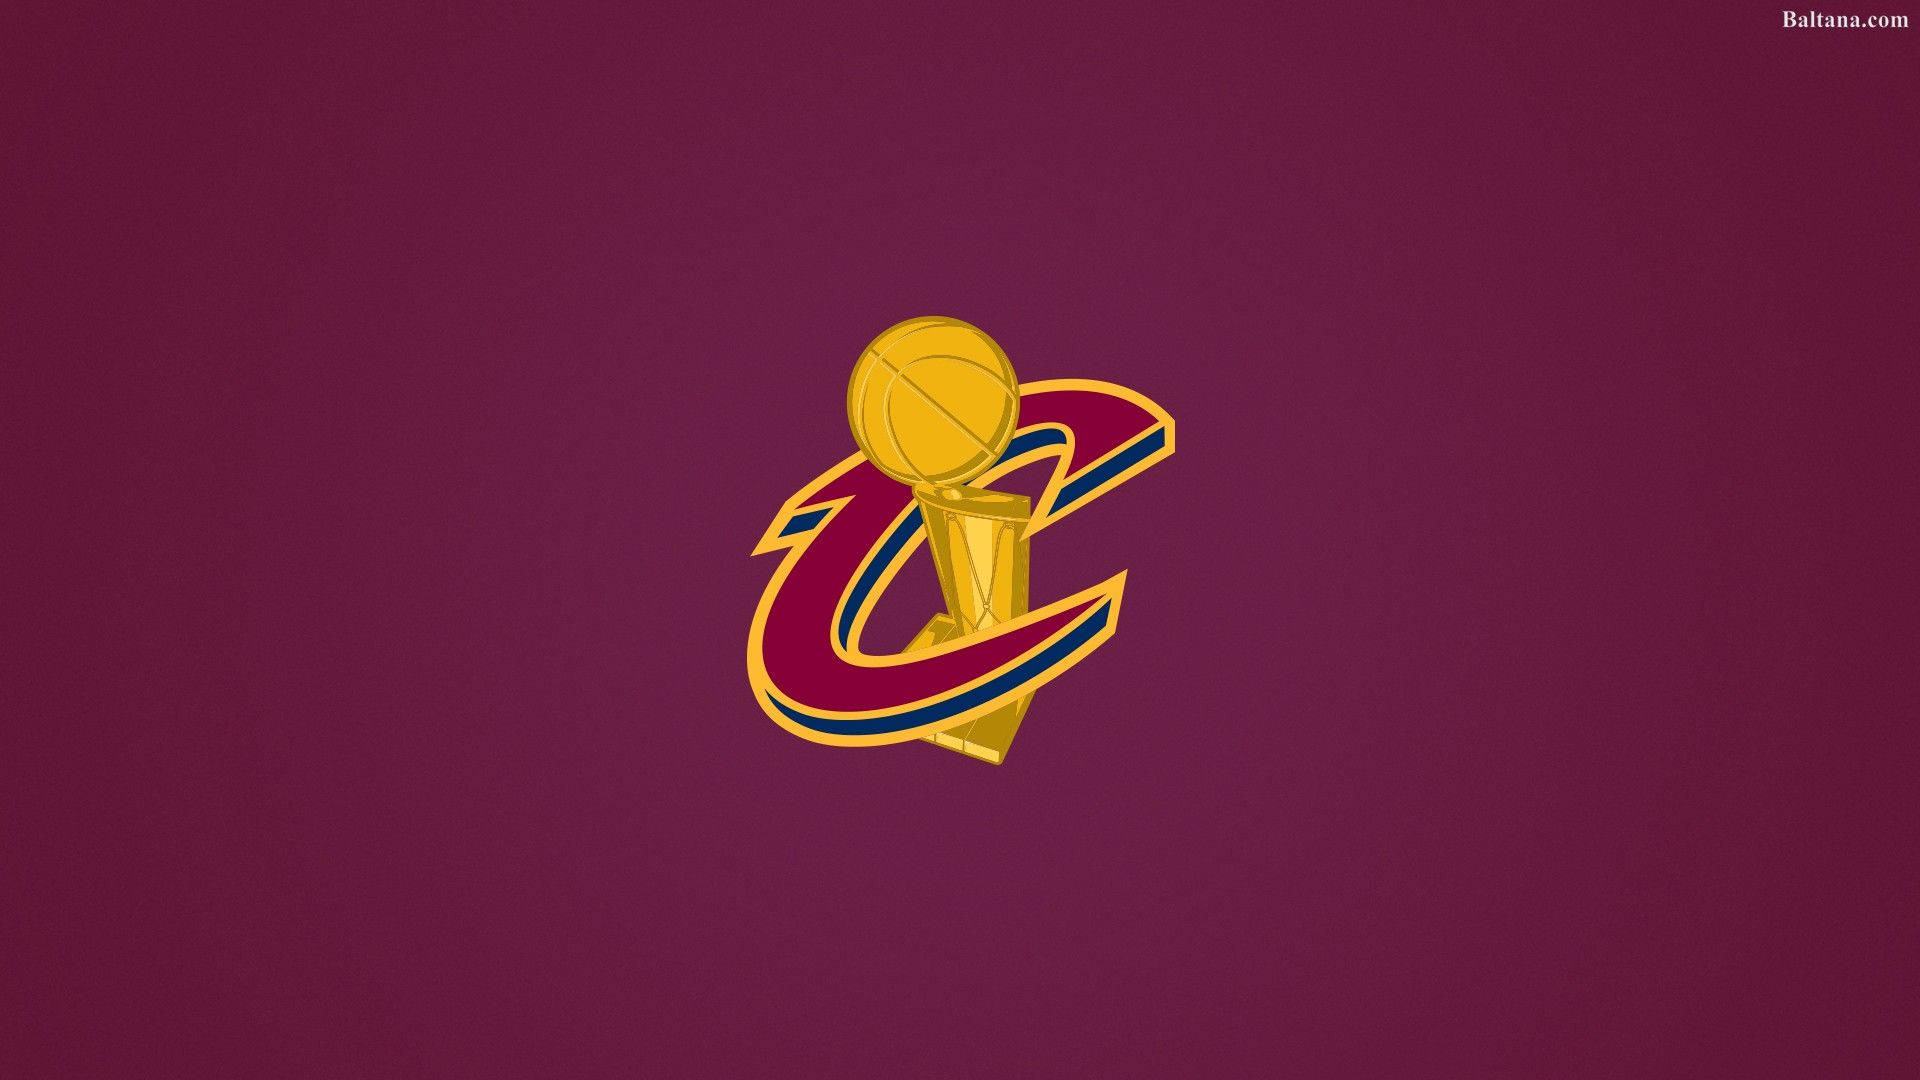 Cleveland Cavaliers Championship Trophy Logo Background